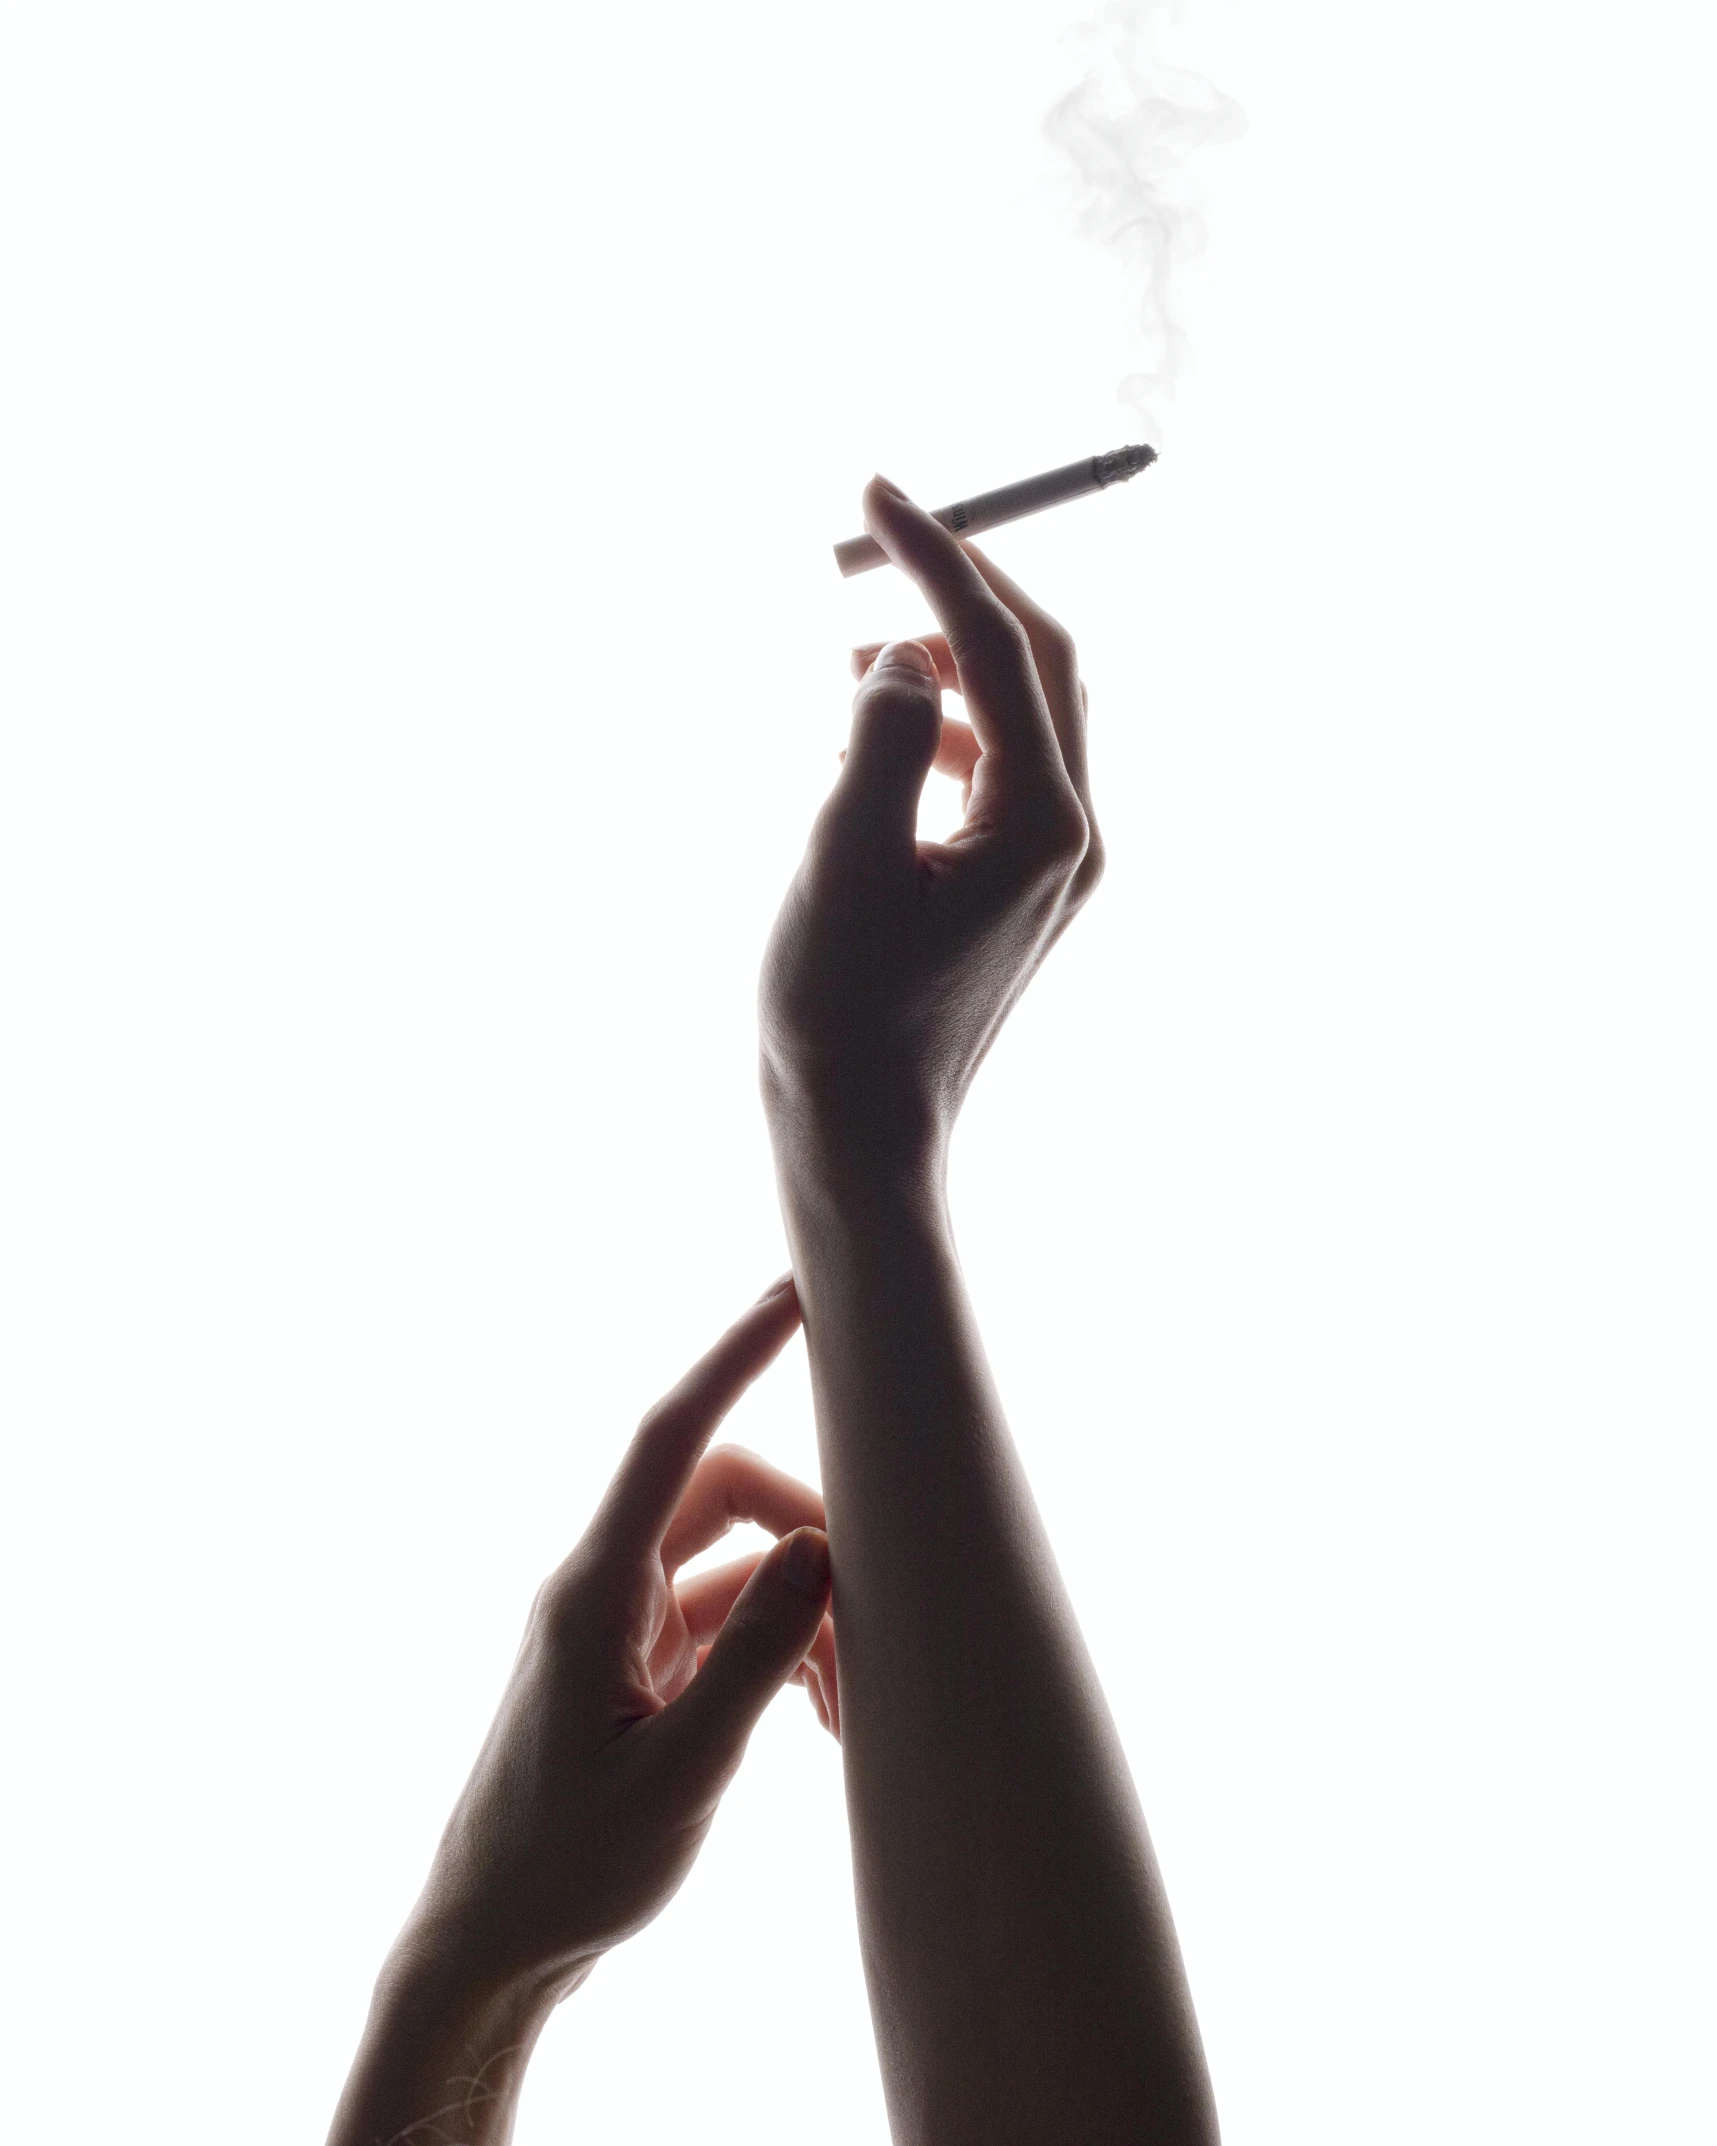 a person holding a cigarette in their hand, by Gavin Hamilton, aestheticism, cannabis, hands reaching for her, profile image, lesbians